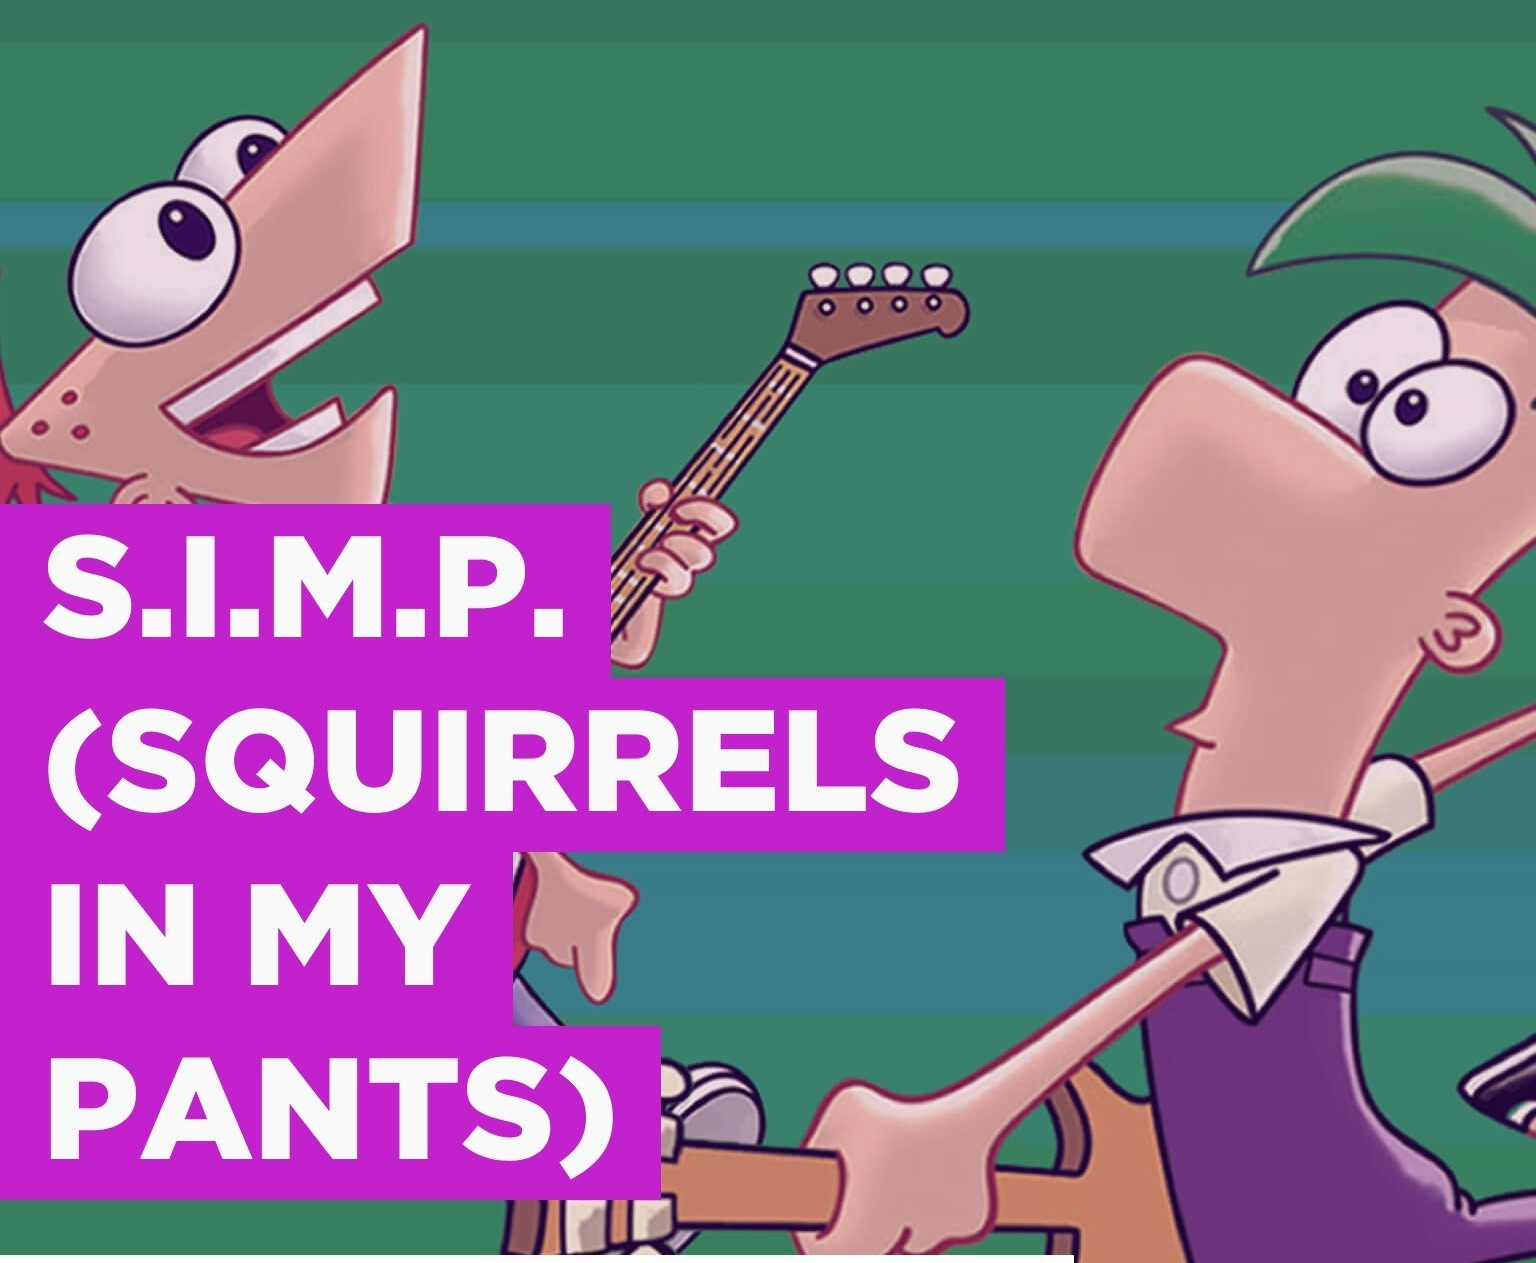 High Quality S.I.M.P (squirrels in my pants) Blank Meme Template